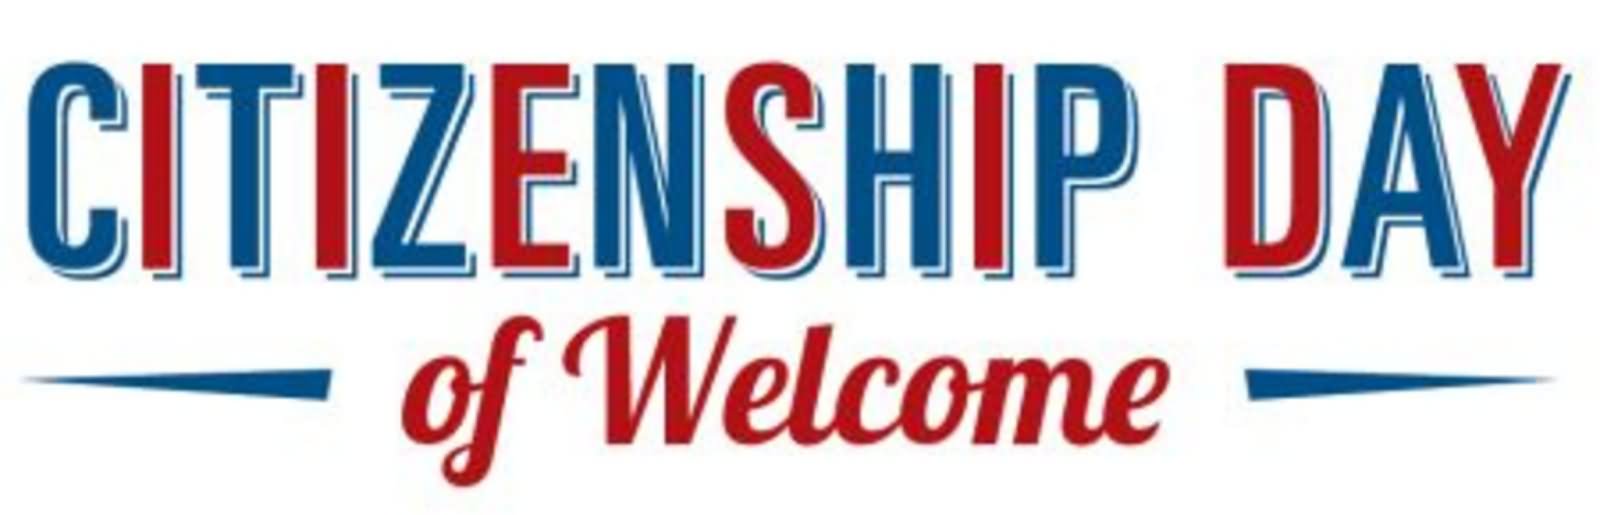 Citizenship Day Of Welcome Header Image